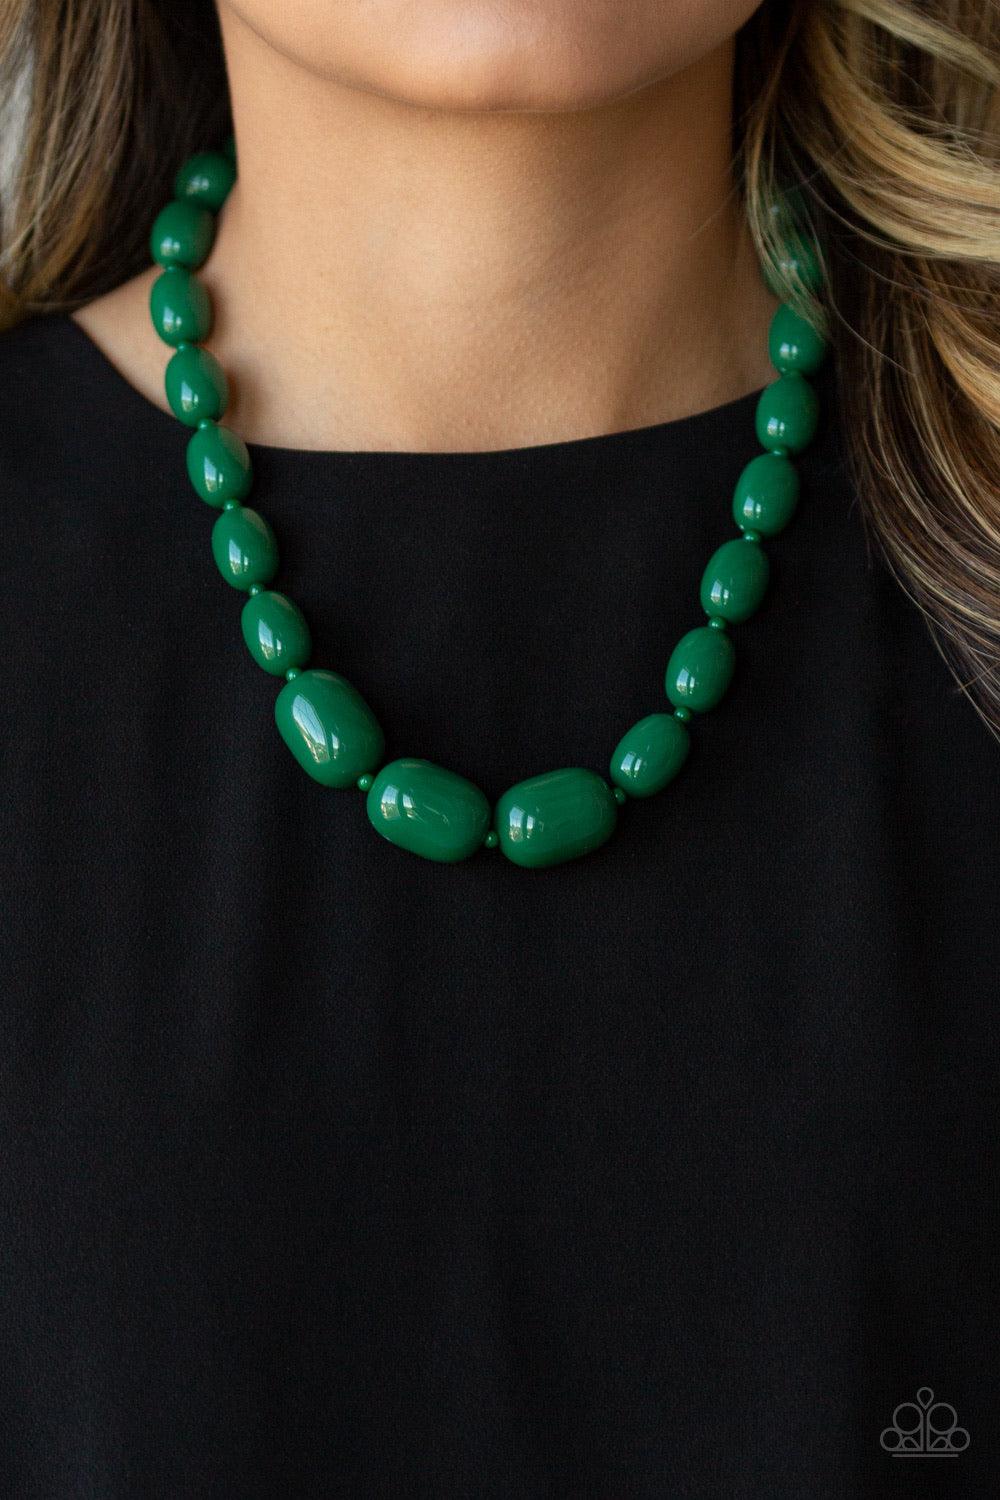 Paparazzi Accessories Poppin Popularity - Green Infused with dainty Eden beads, round Eden beads trickle into bold oval beads, creating a bold pop of color below the collar. Features an adjustable clasp closure. Jewelry